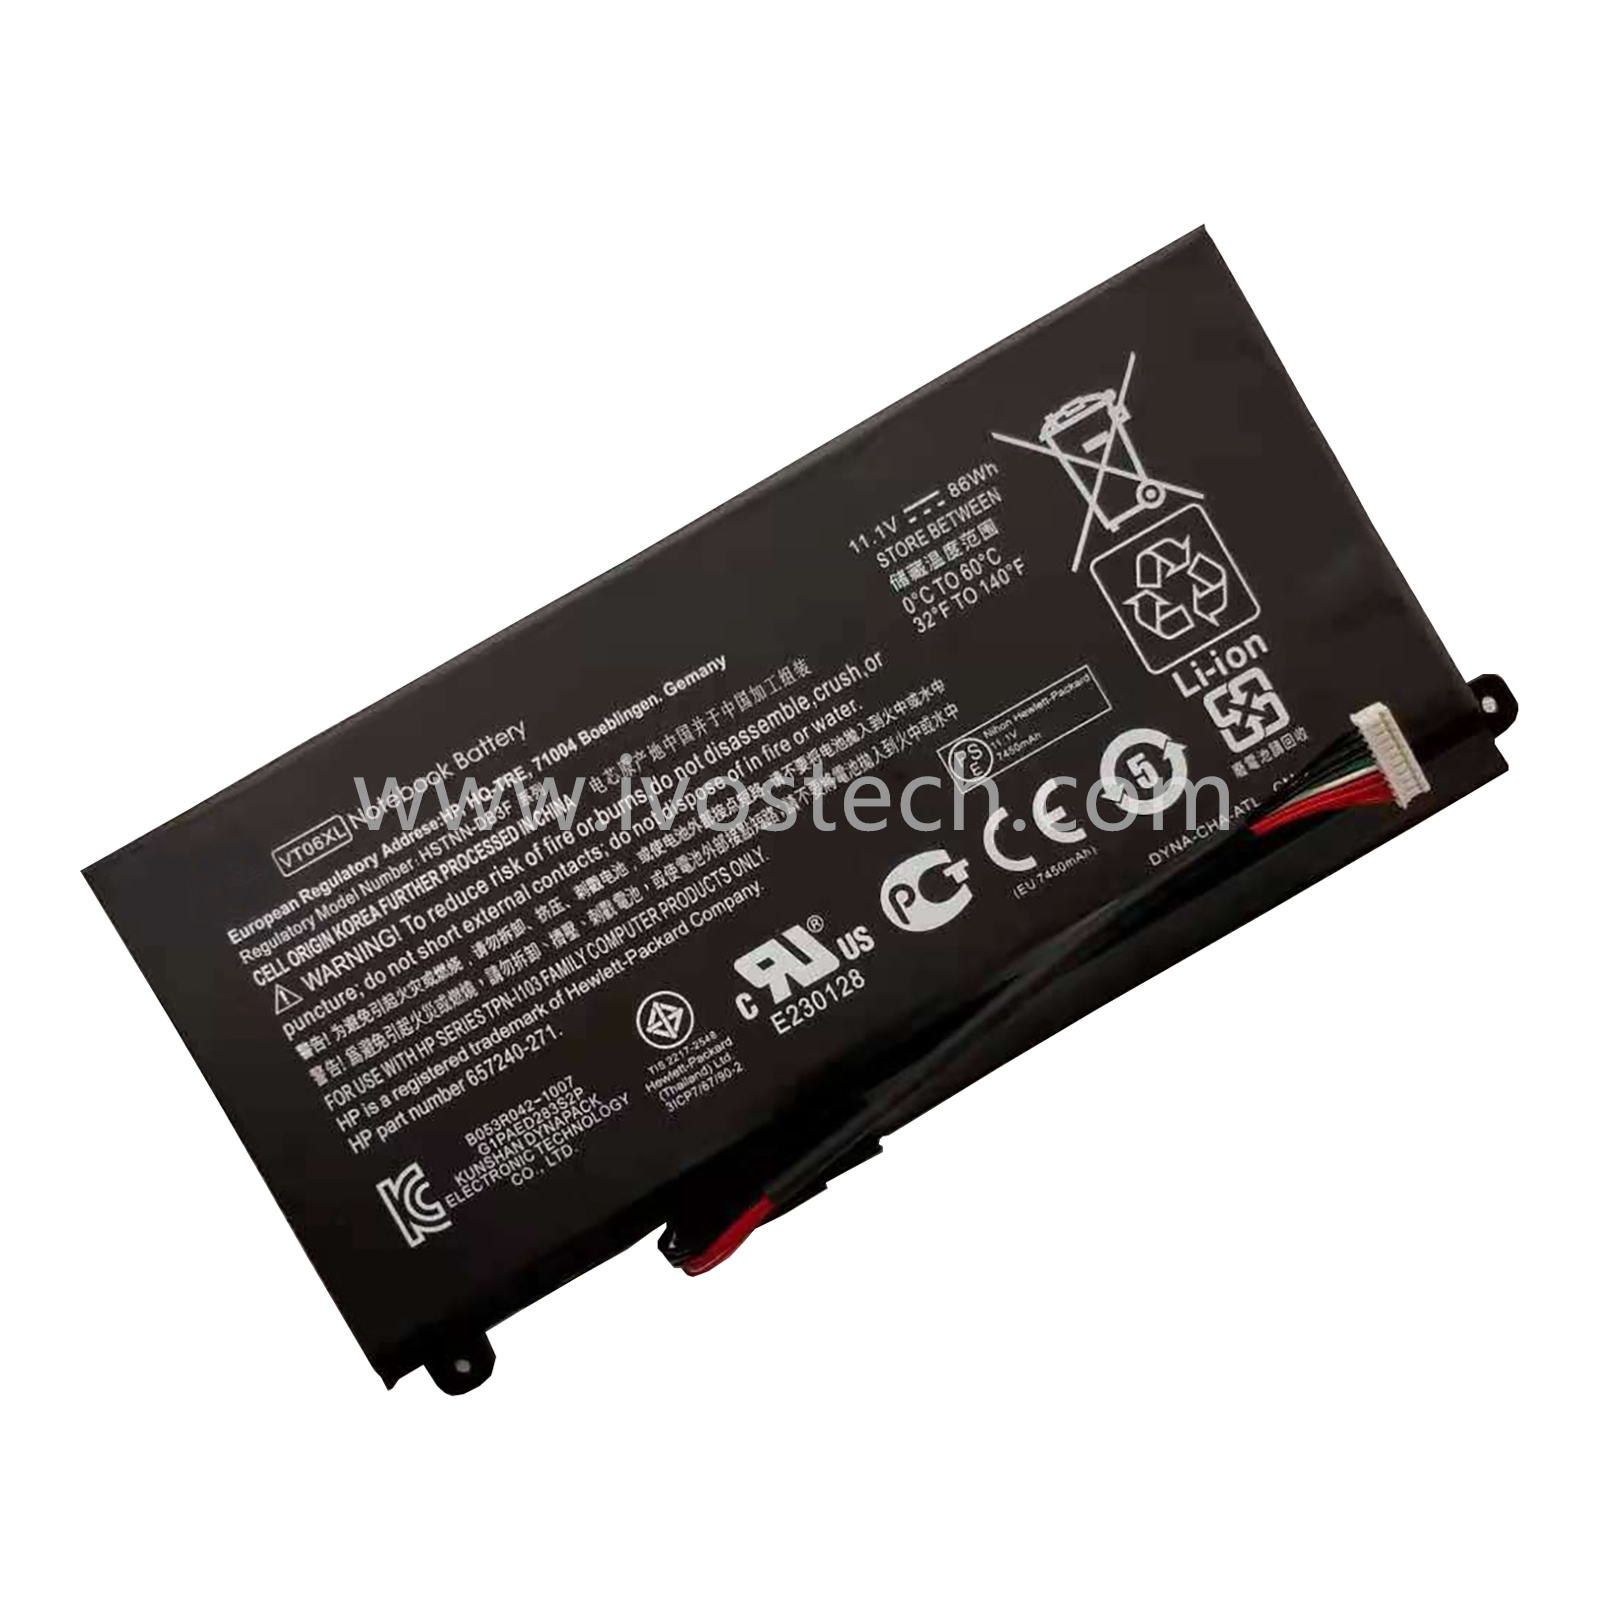 VT06XL 86Wh 11.1V Replacement Laptop Battery for HP Envy 17-3000 17T-3000 Series